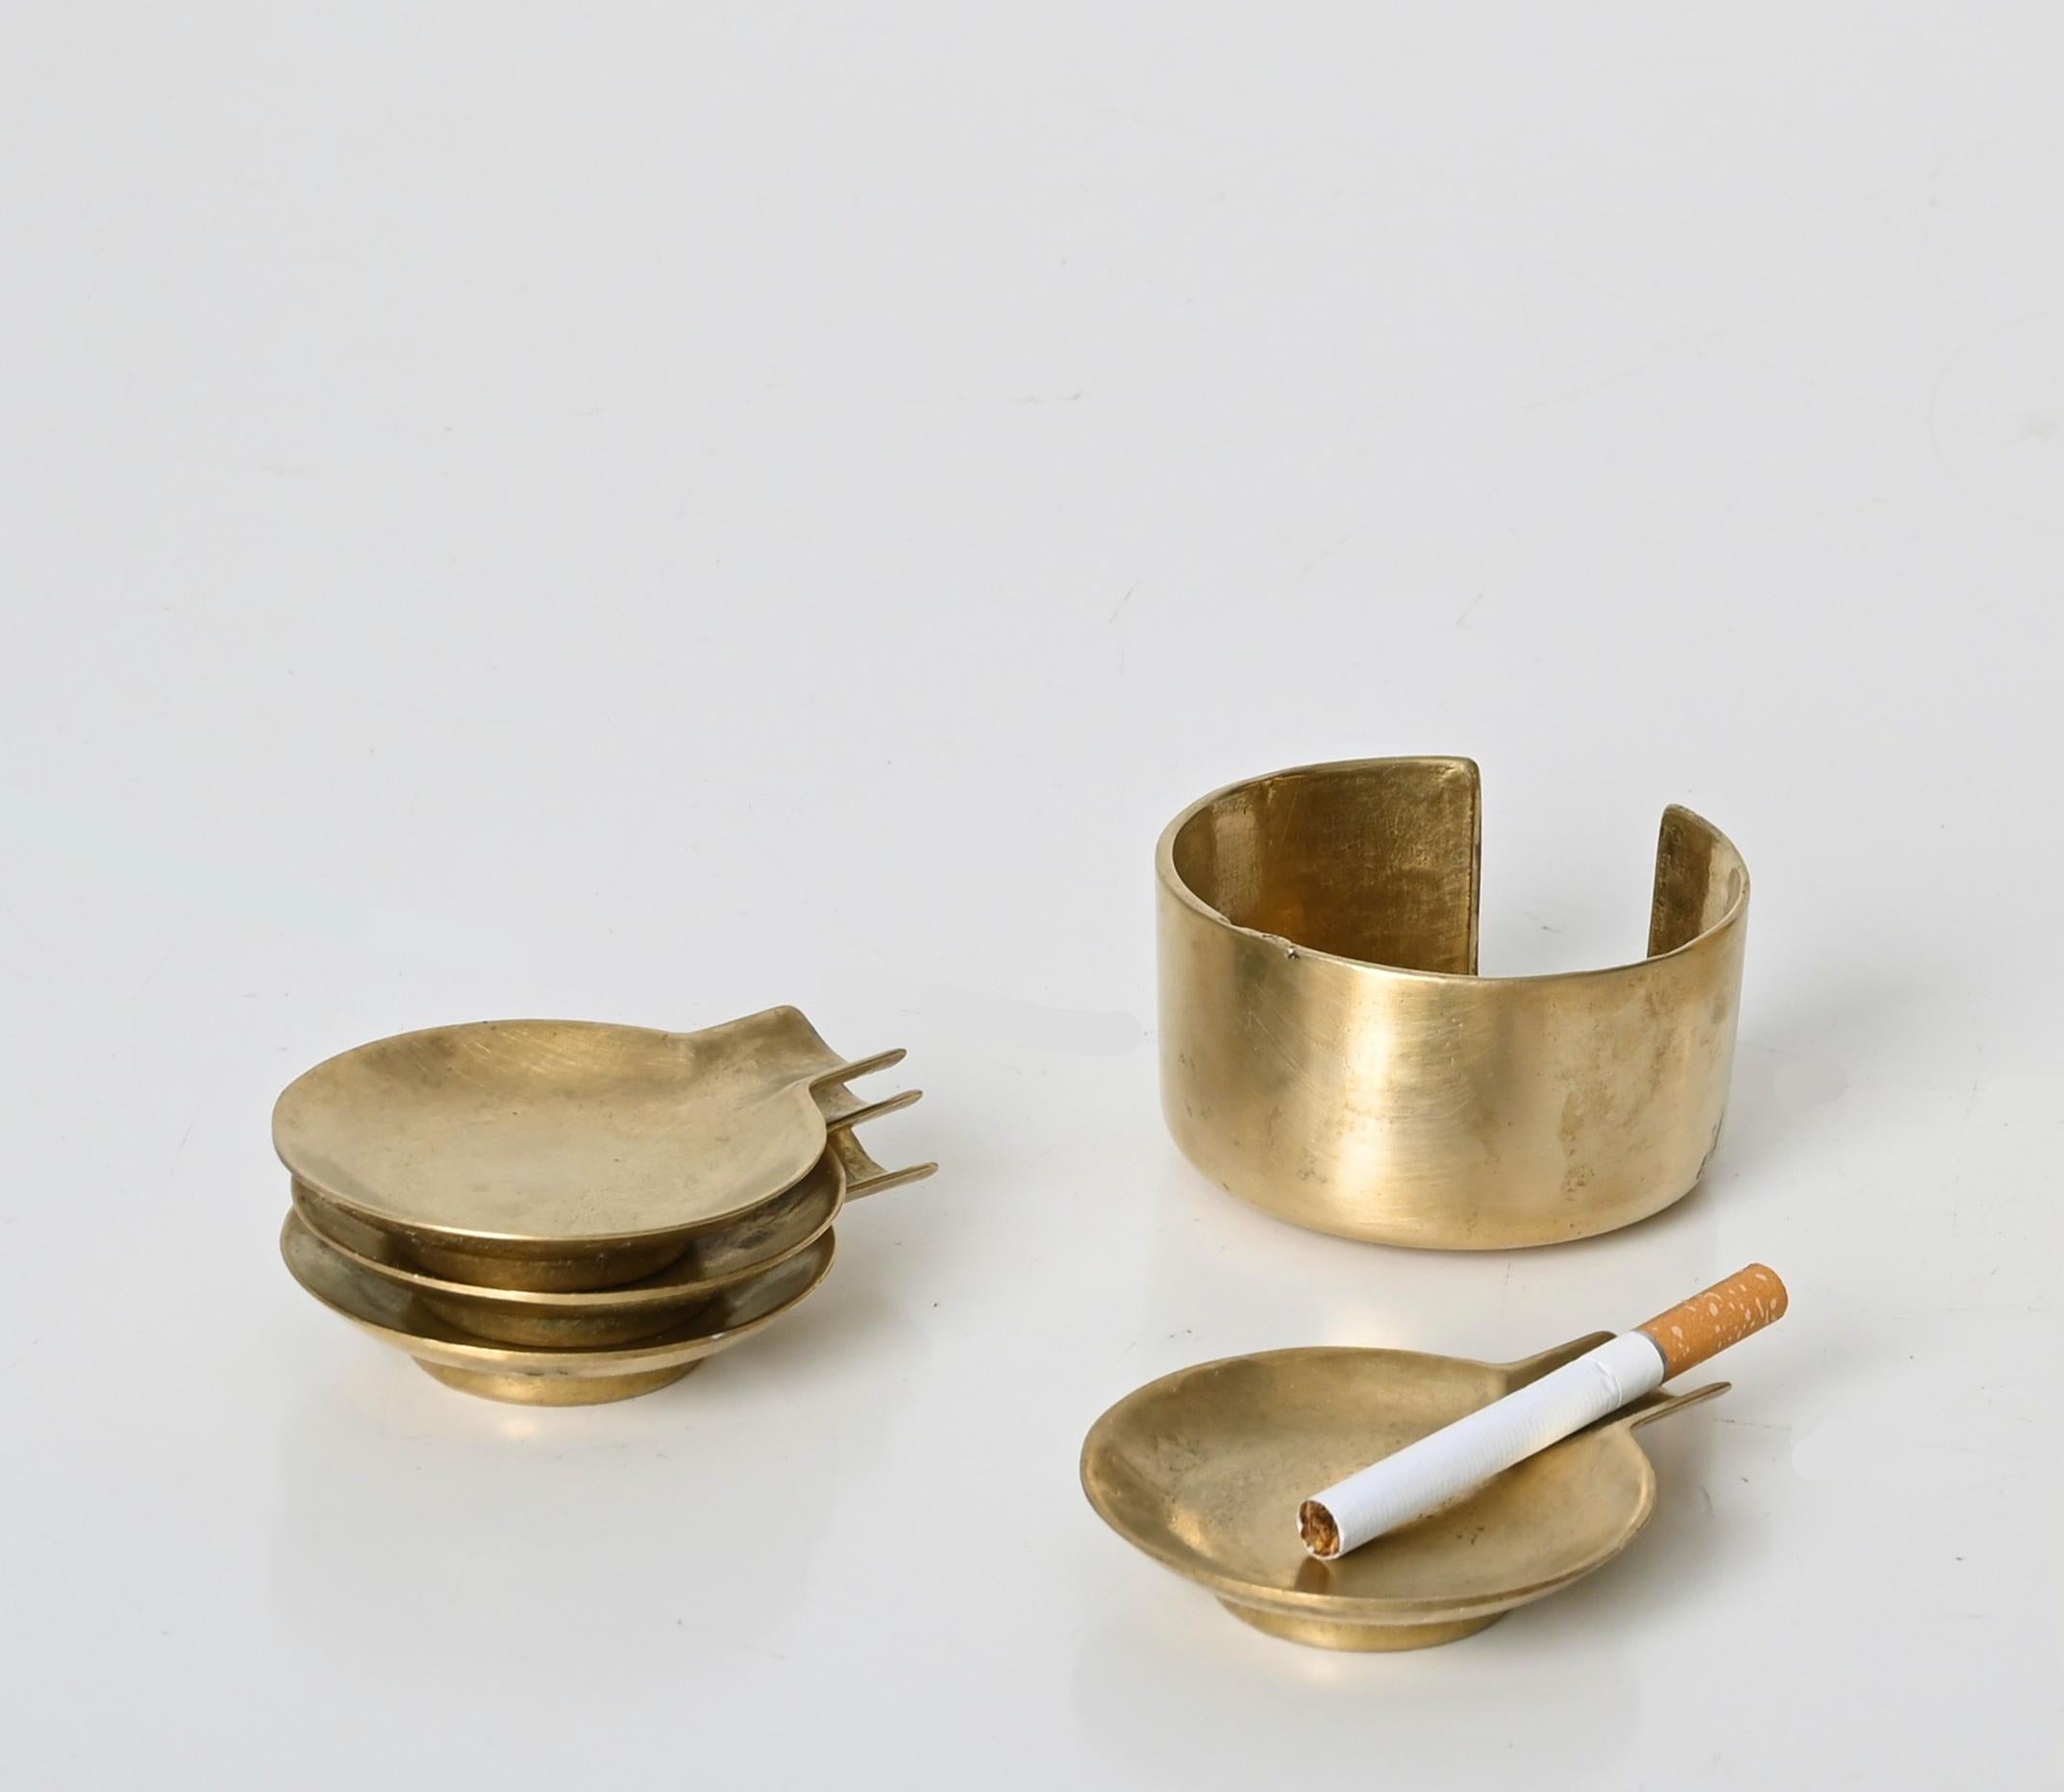 Beautiful set of four stackable ashtrays in solid brass. This elegant and versatile set was produced in Austria during the 1950s after Adnet.

The light reflection of the solid brass and the four ashtrays that can be stacked into the main structure